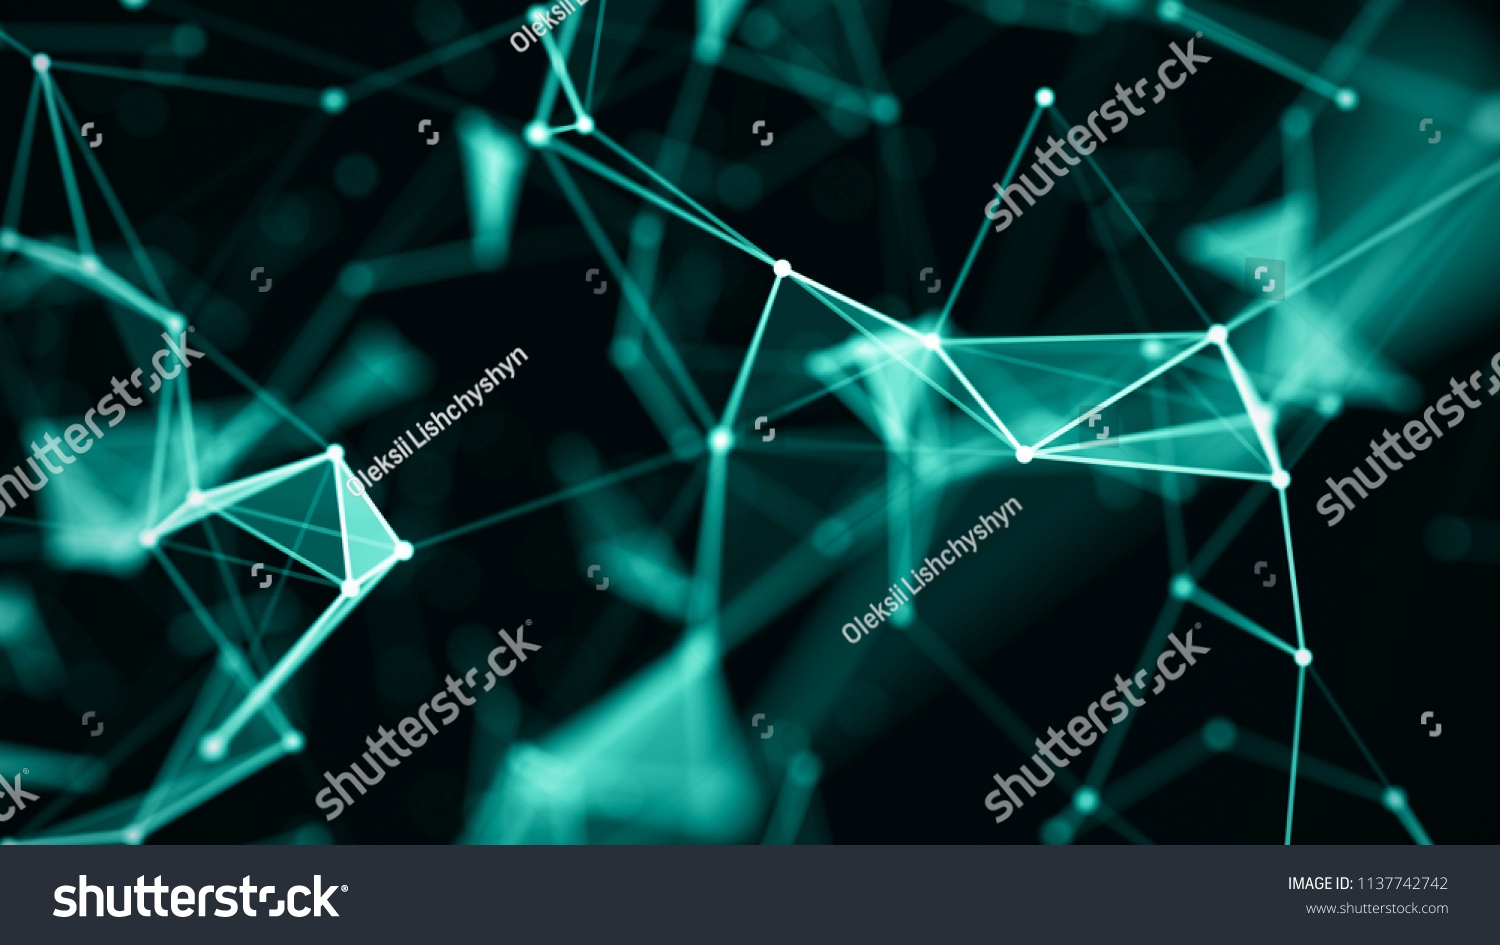 Abstract digital background. Big data visualization. Network connection structure. Science background. 3D rendering. #1137742742